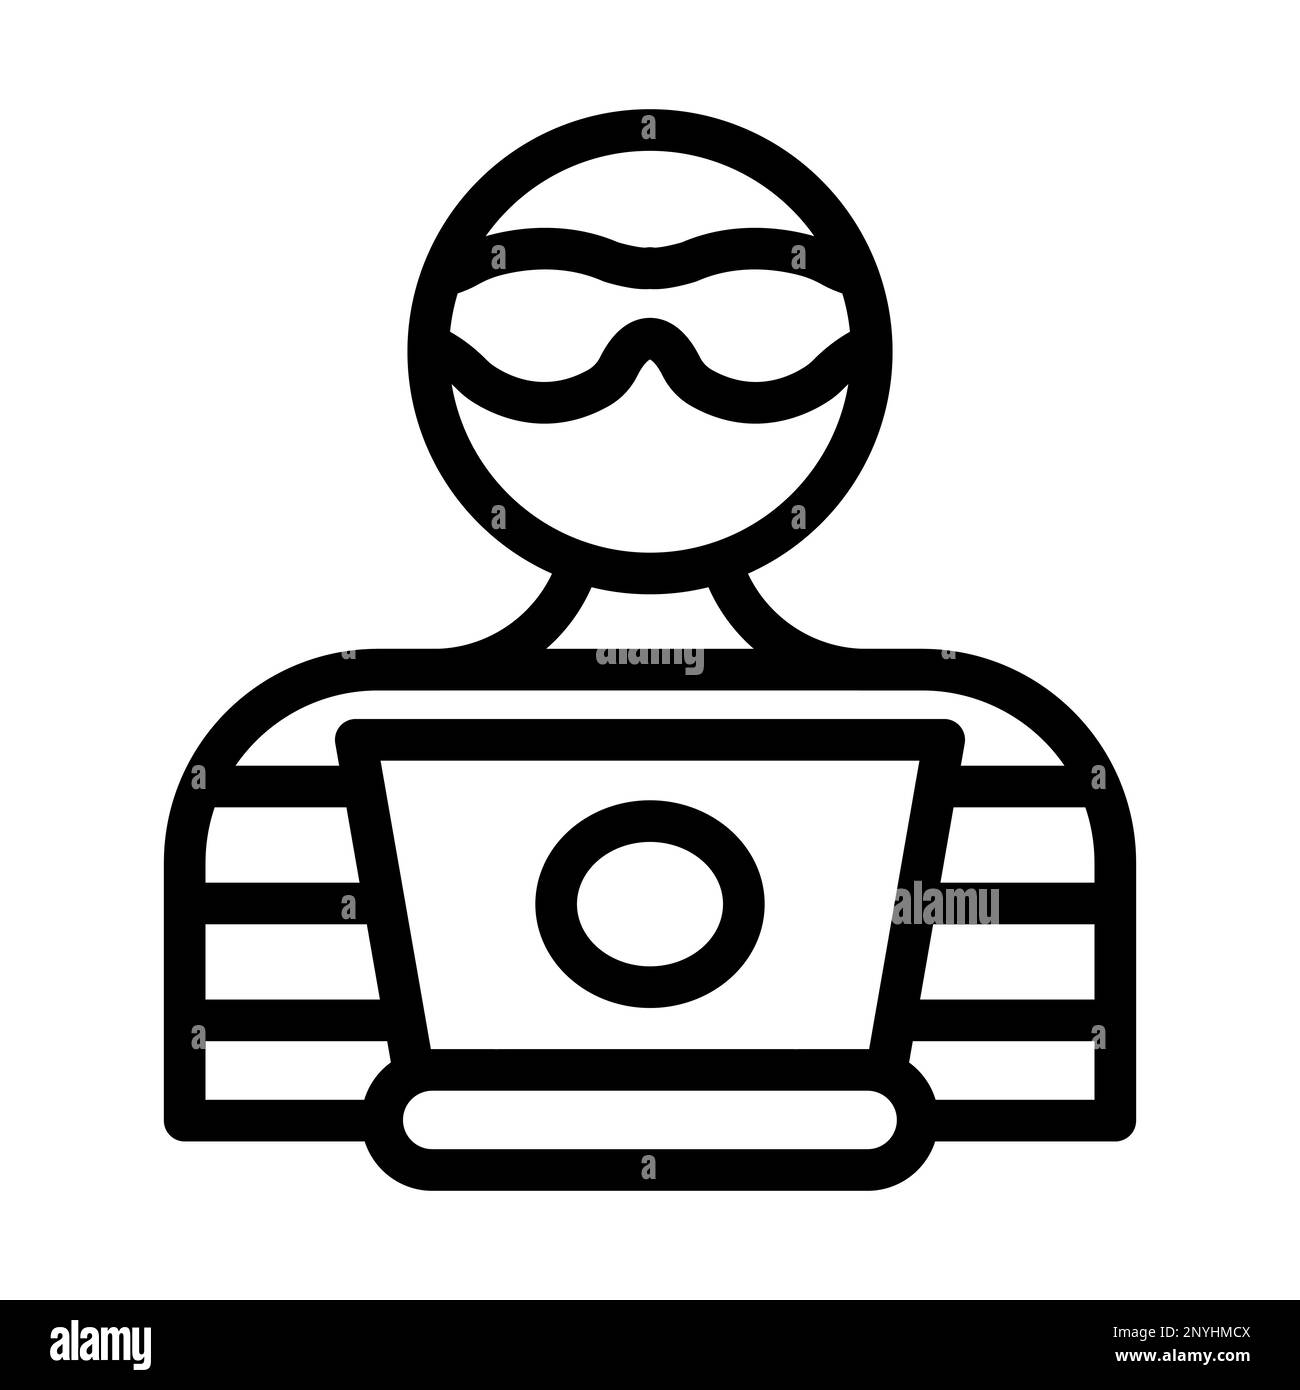 Robber Thick Line Icon Stock Photo